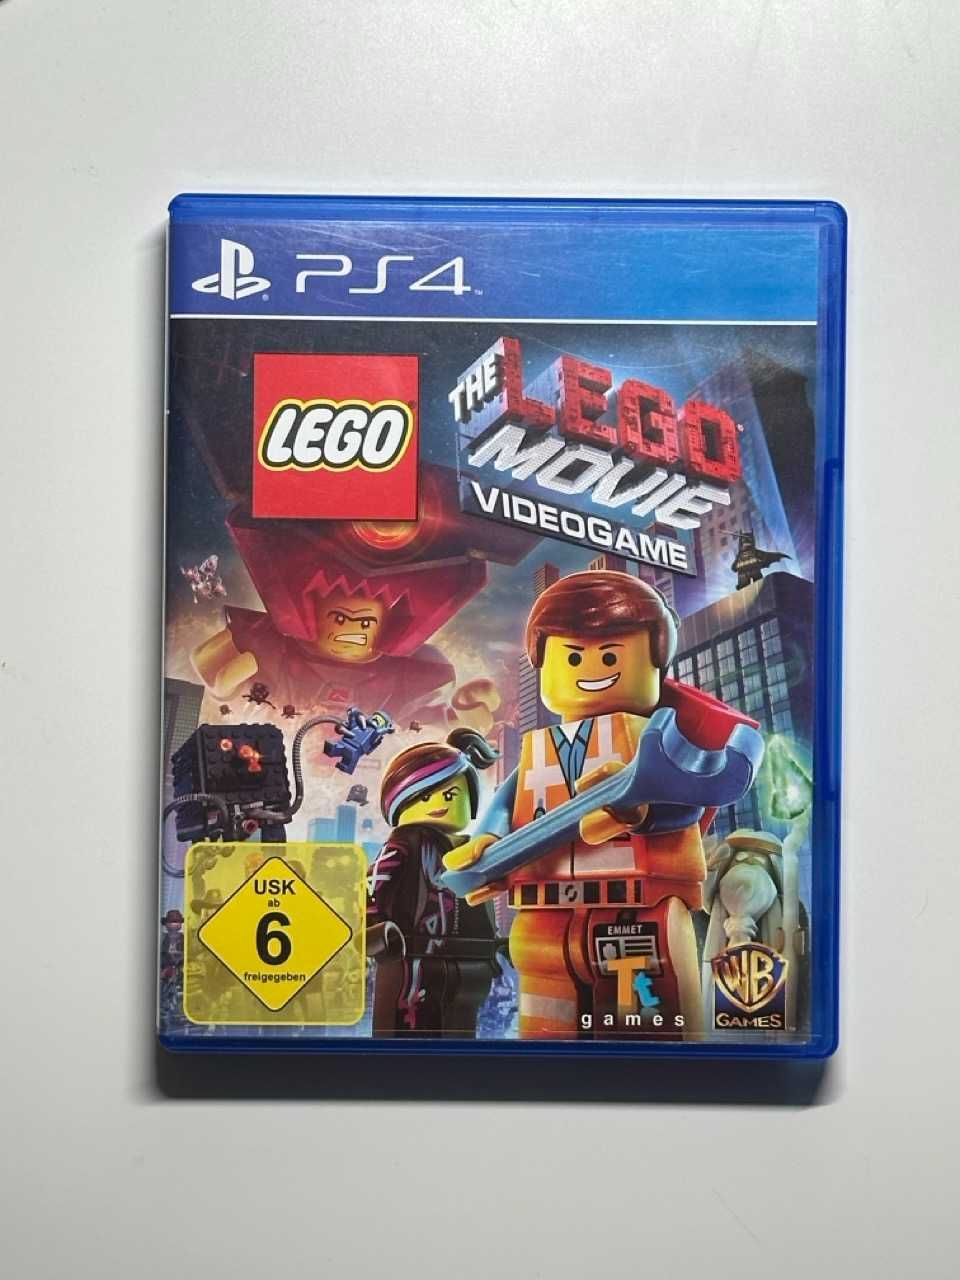 The lego moview videogame PS4